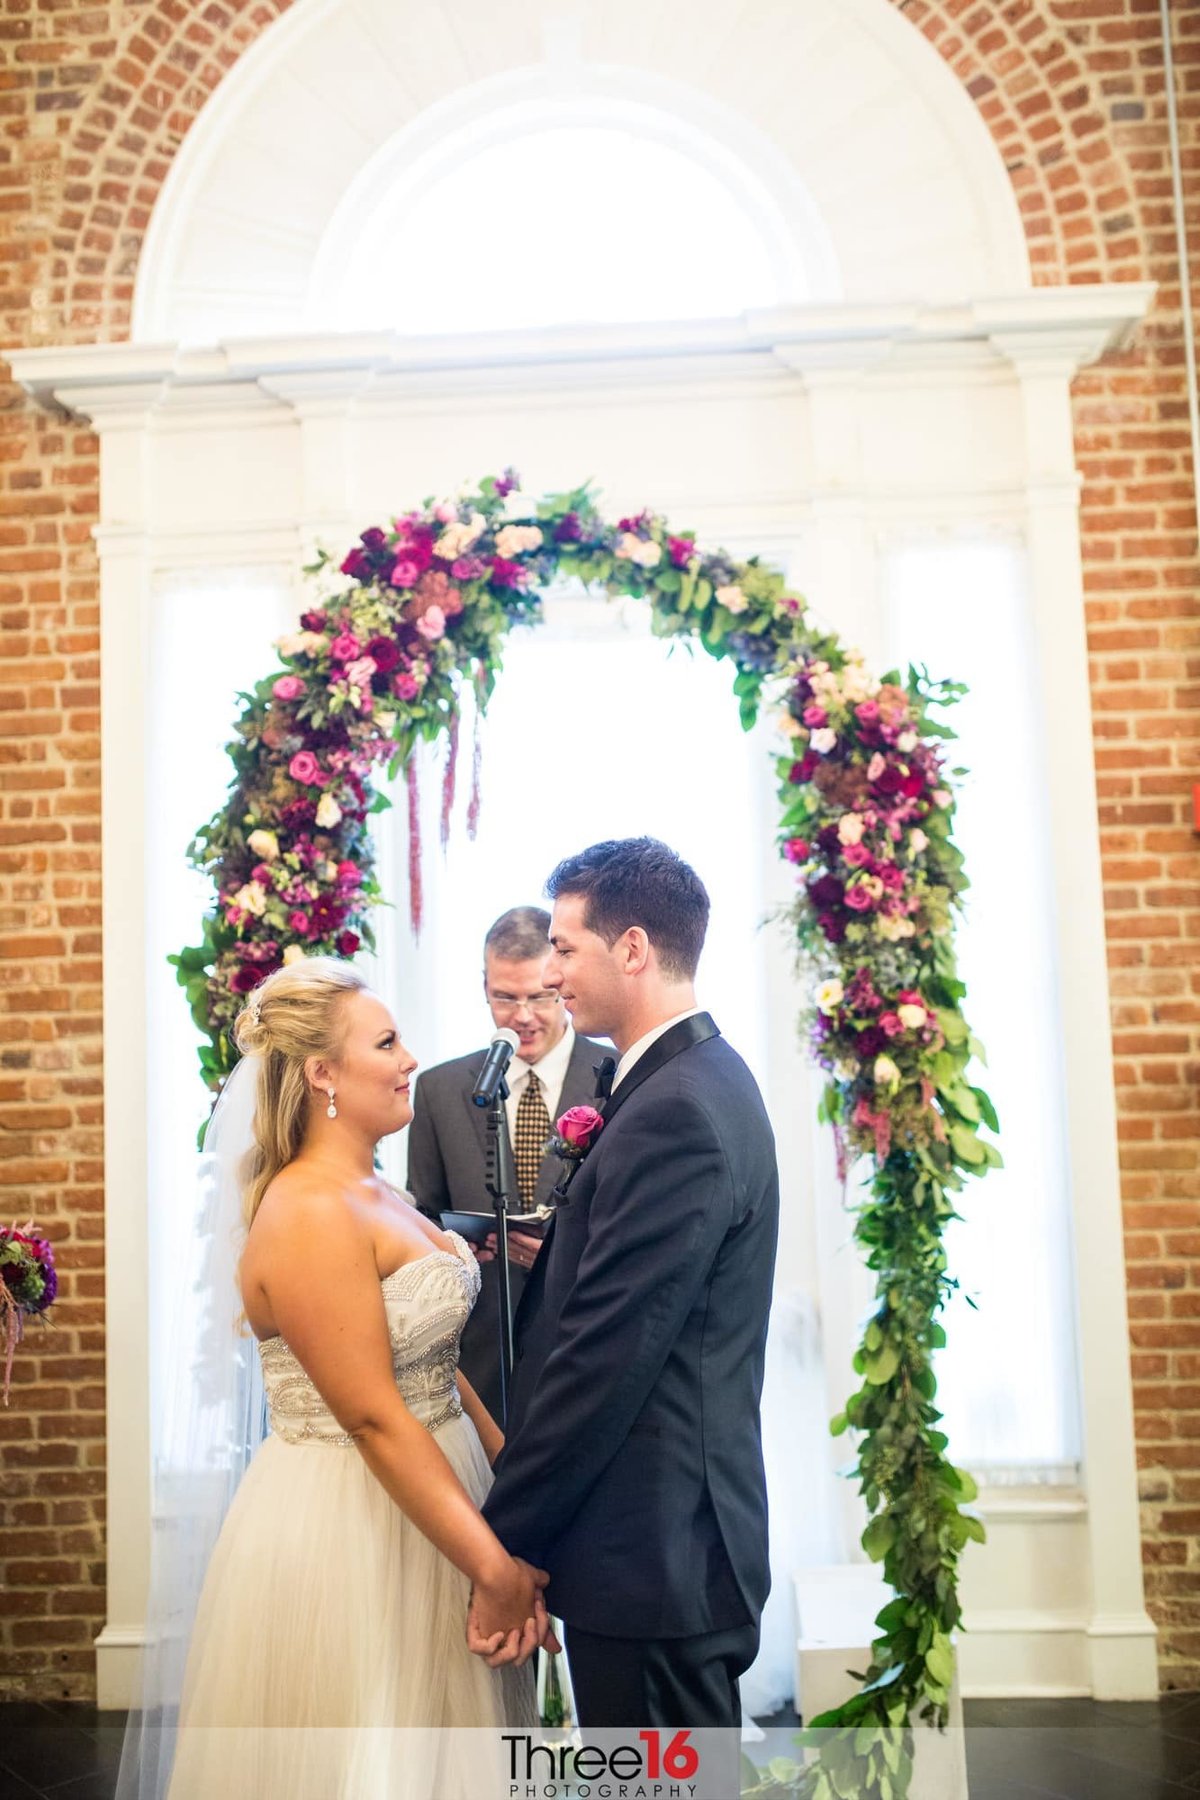 Bride and Groom look into each other's eyes during the ceremony